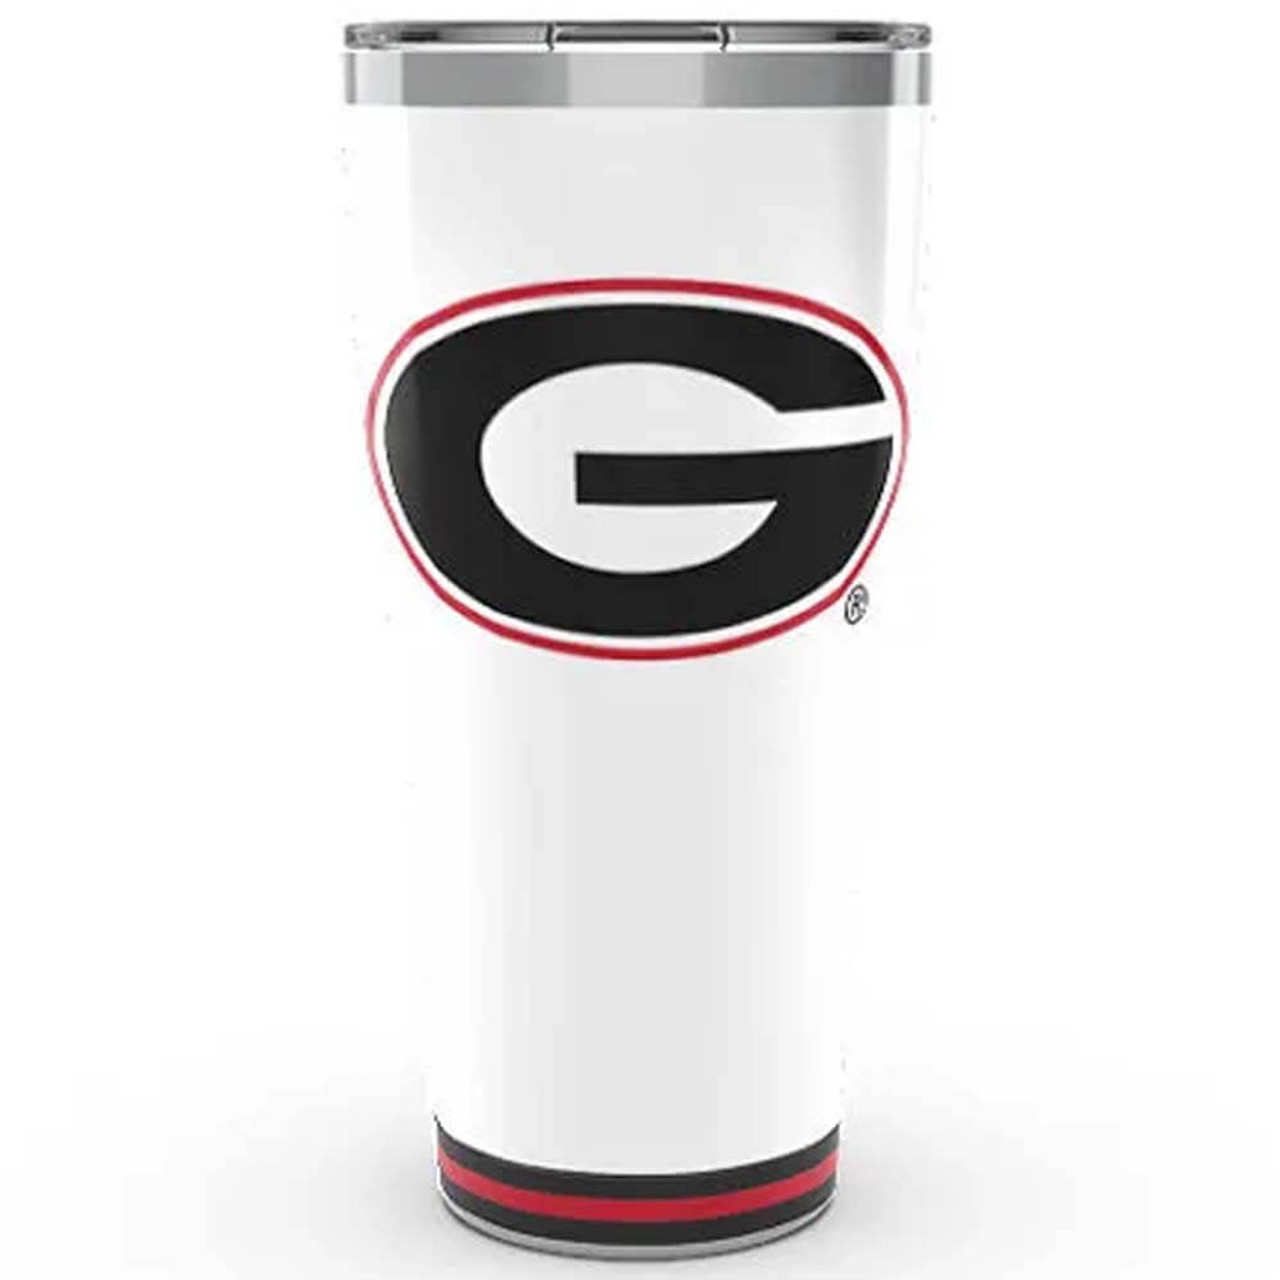 https://cdn11.bigcommerce.com/s-zut1msomd6/images/stencil/1280x1280/products/26309/209949/tervis-30oz-stainless-tumbler-georgia-bulldogs-arctic-1373724__94034.1646322209.jpg?c=1